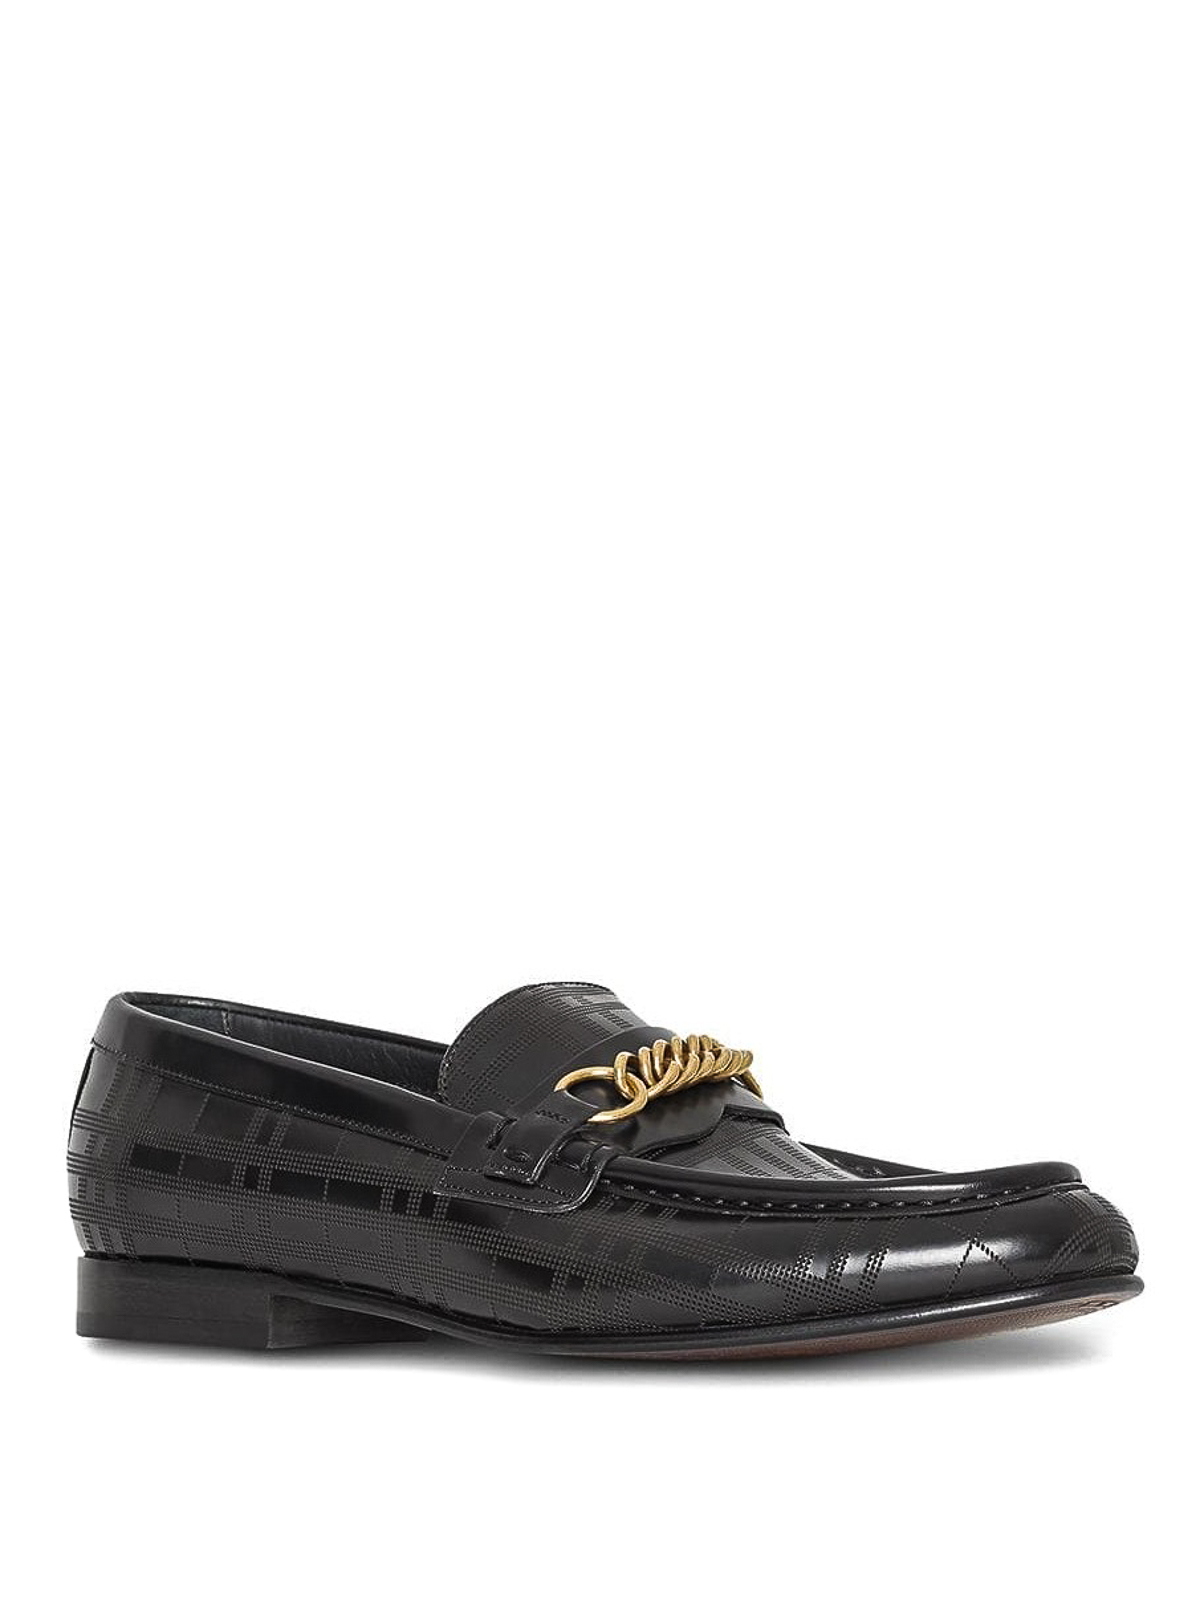 Loafers & Slippers Burberry - Moorley perforated check pattern loafers -  8008163